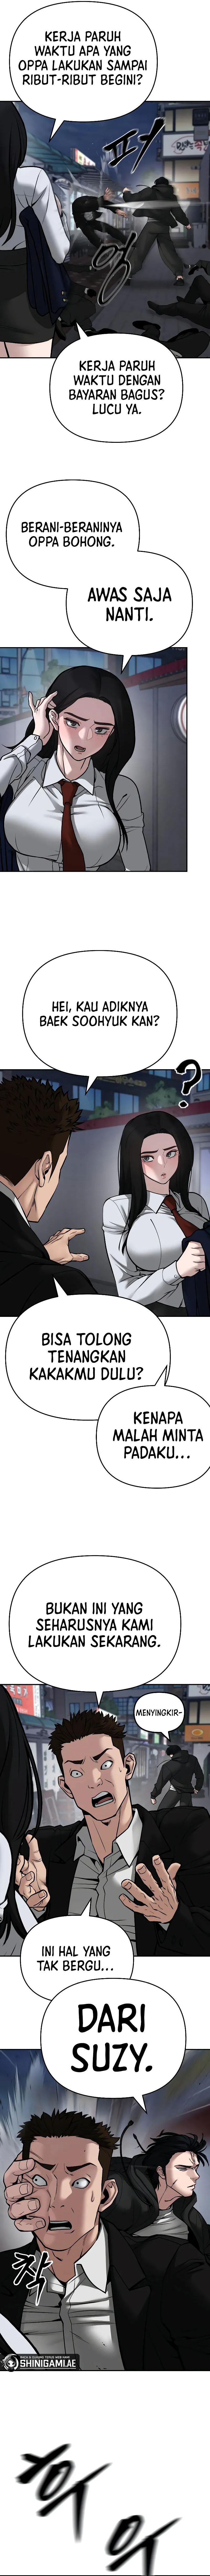 the-bully-in-charge Chapter 85